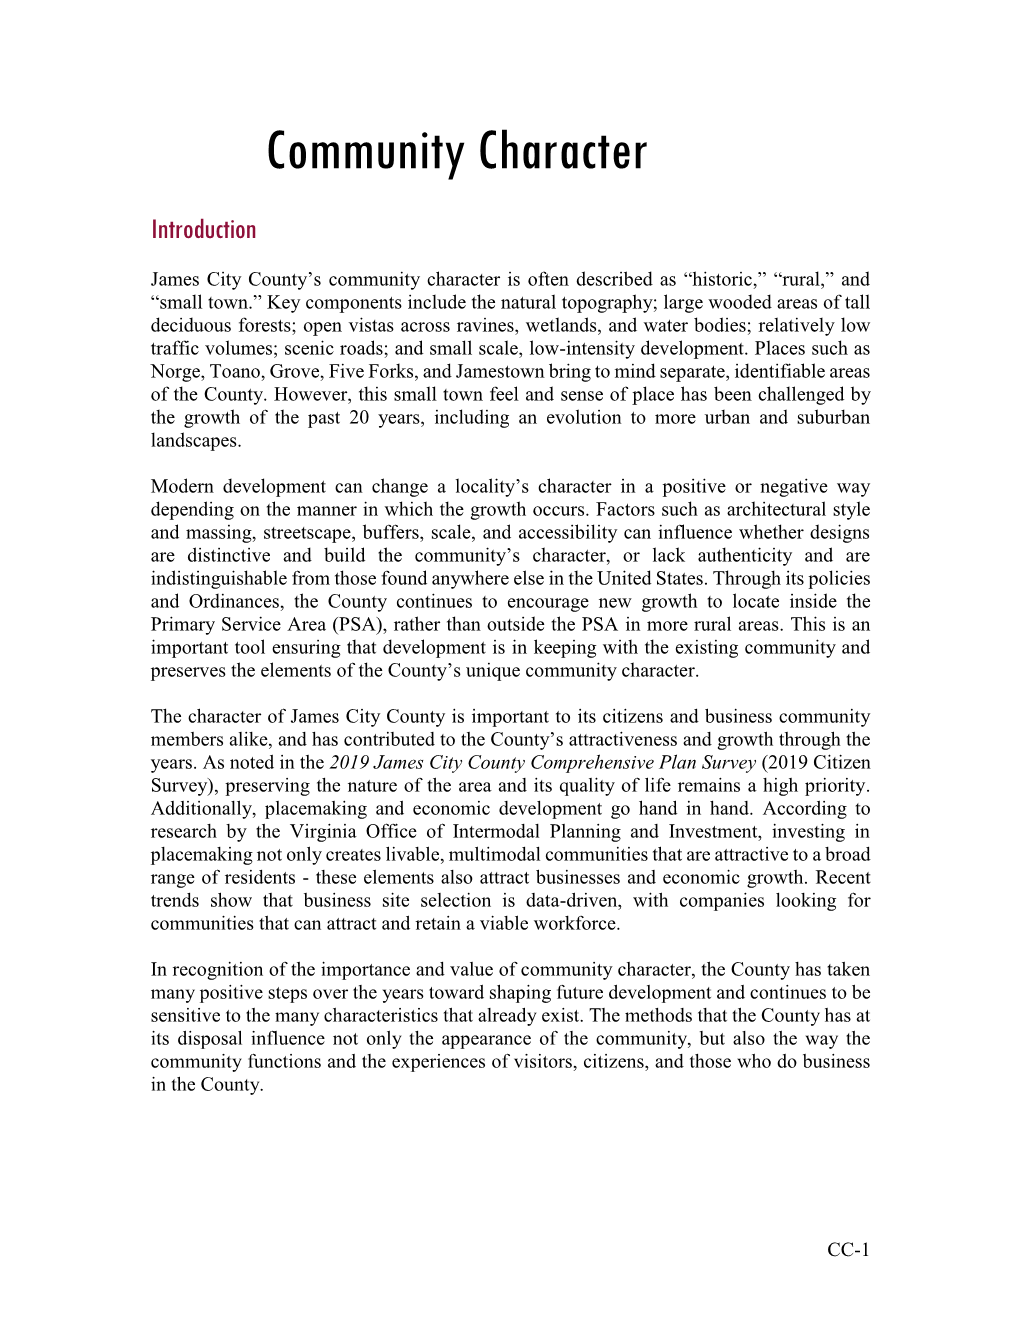 Community Character Technical Report